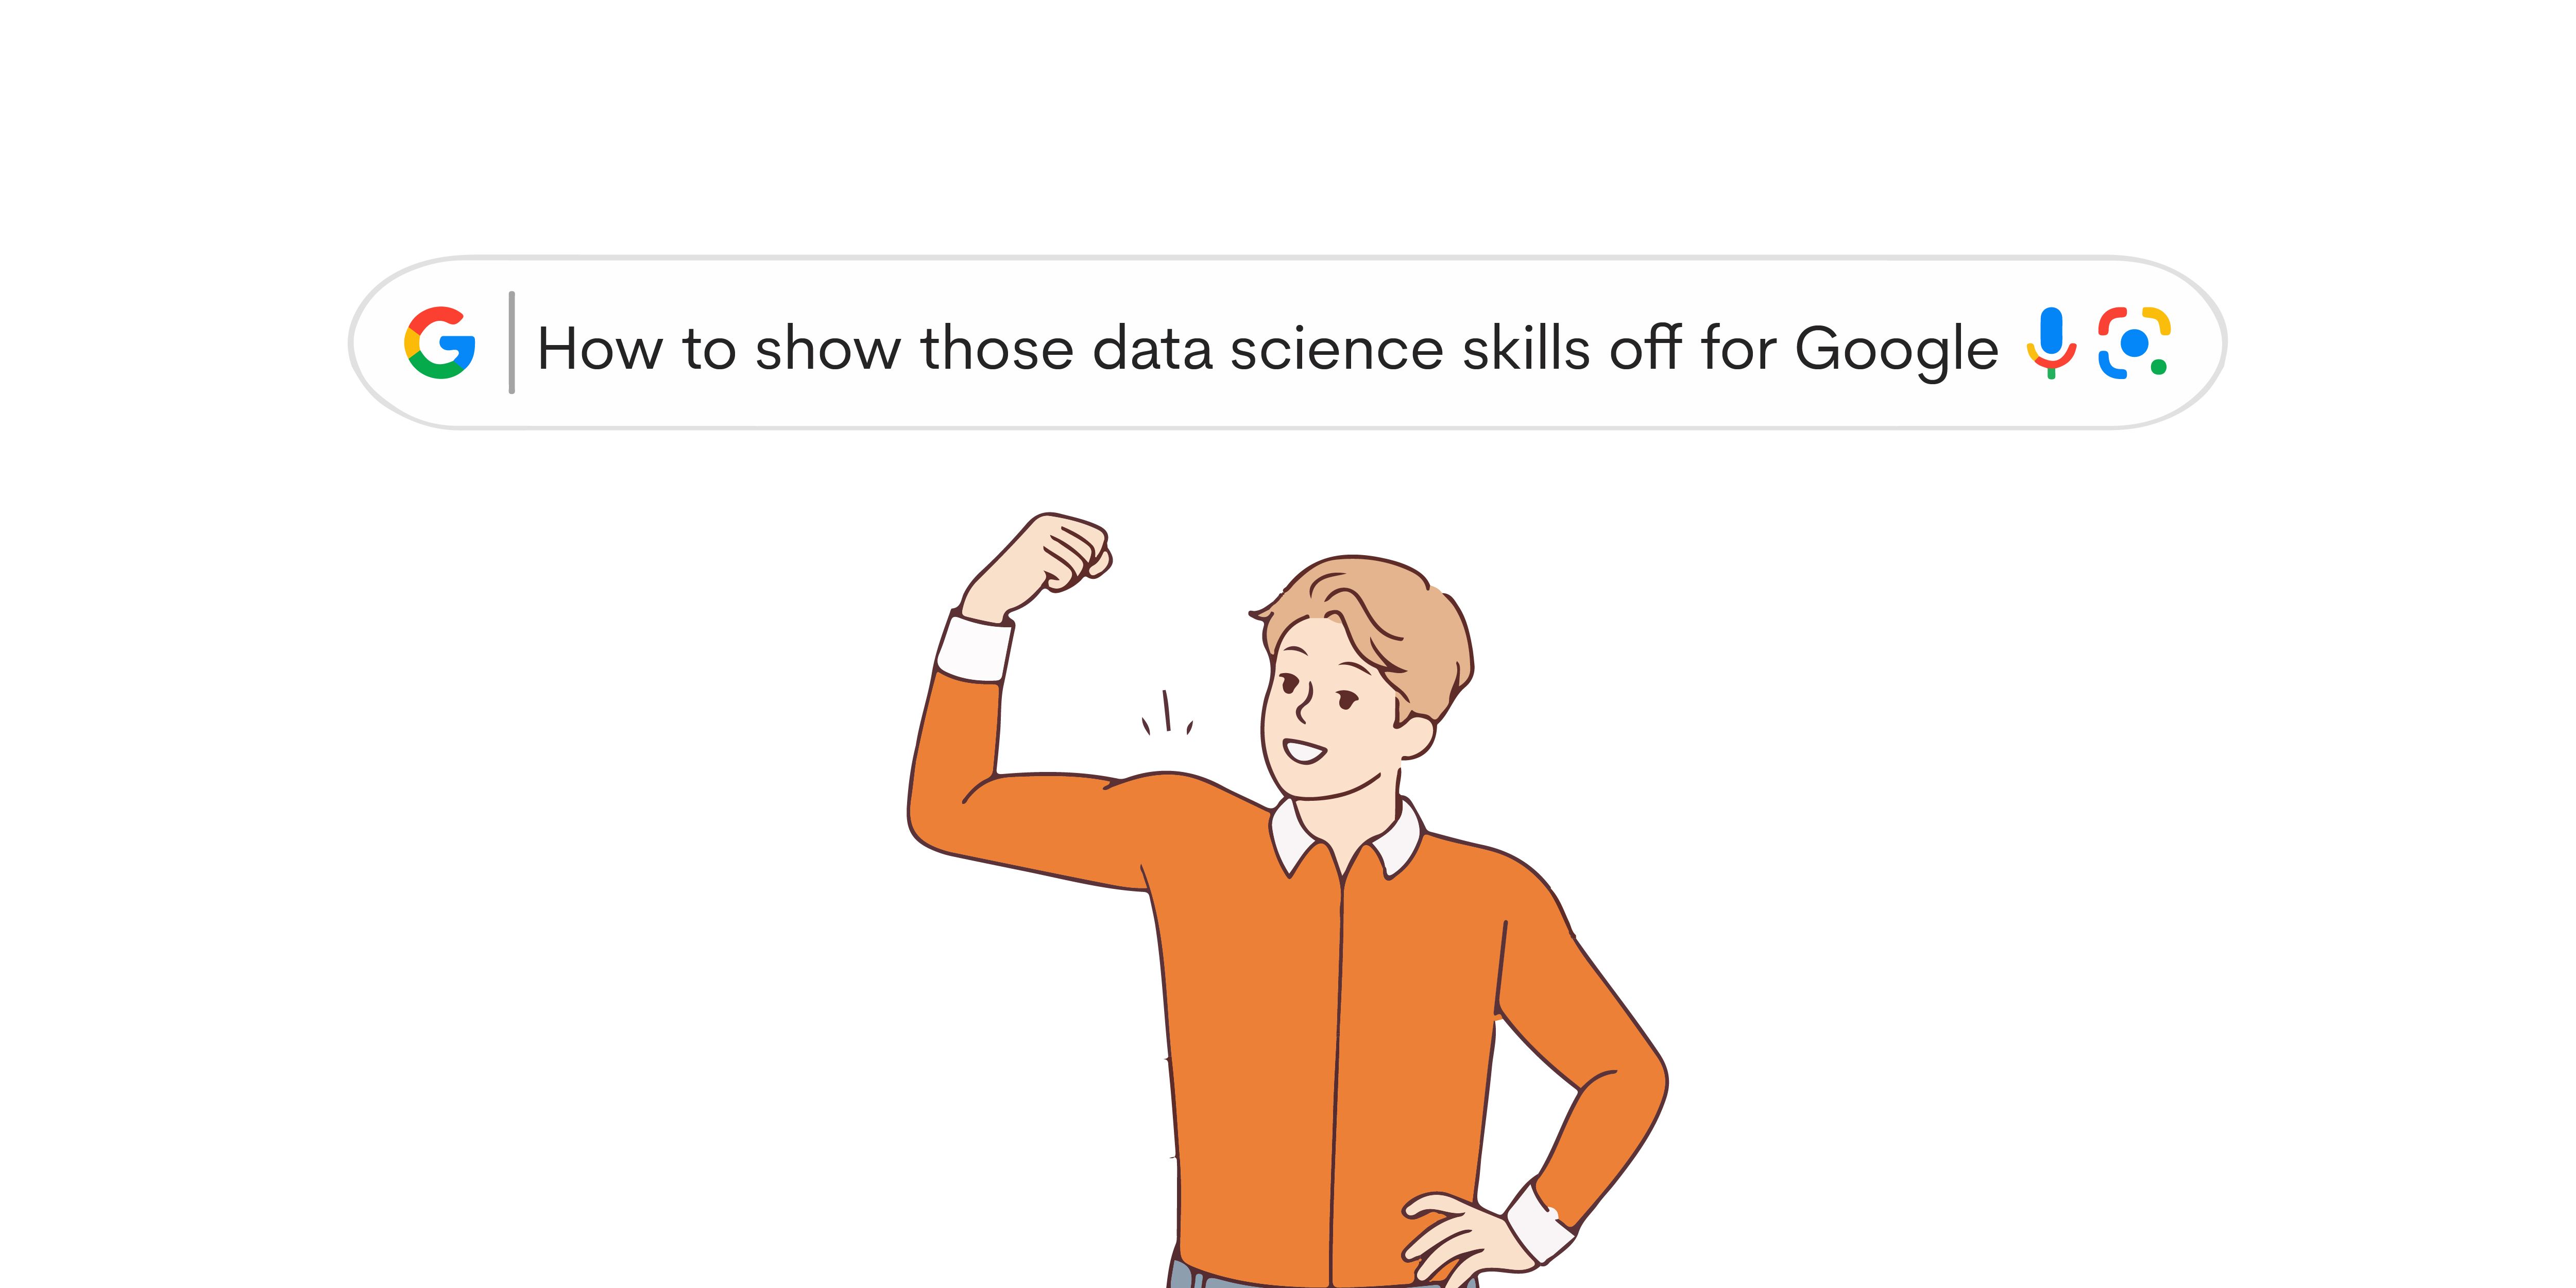 How to show those data science skills off for Google